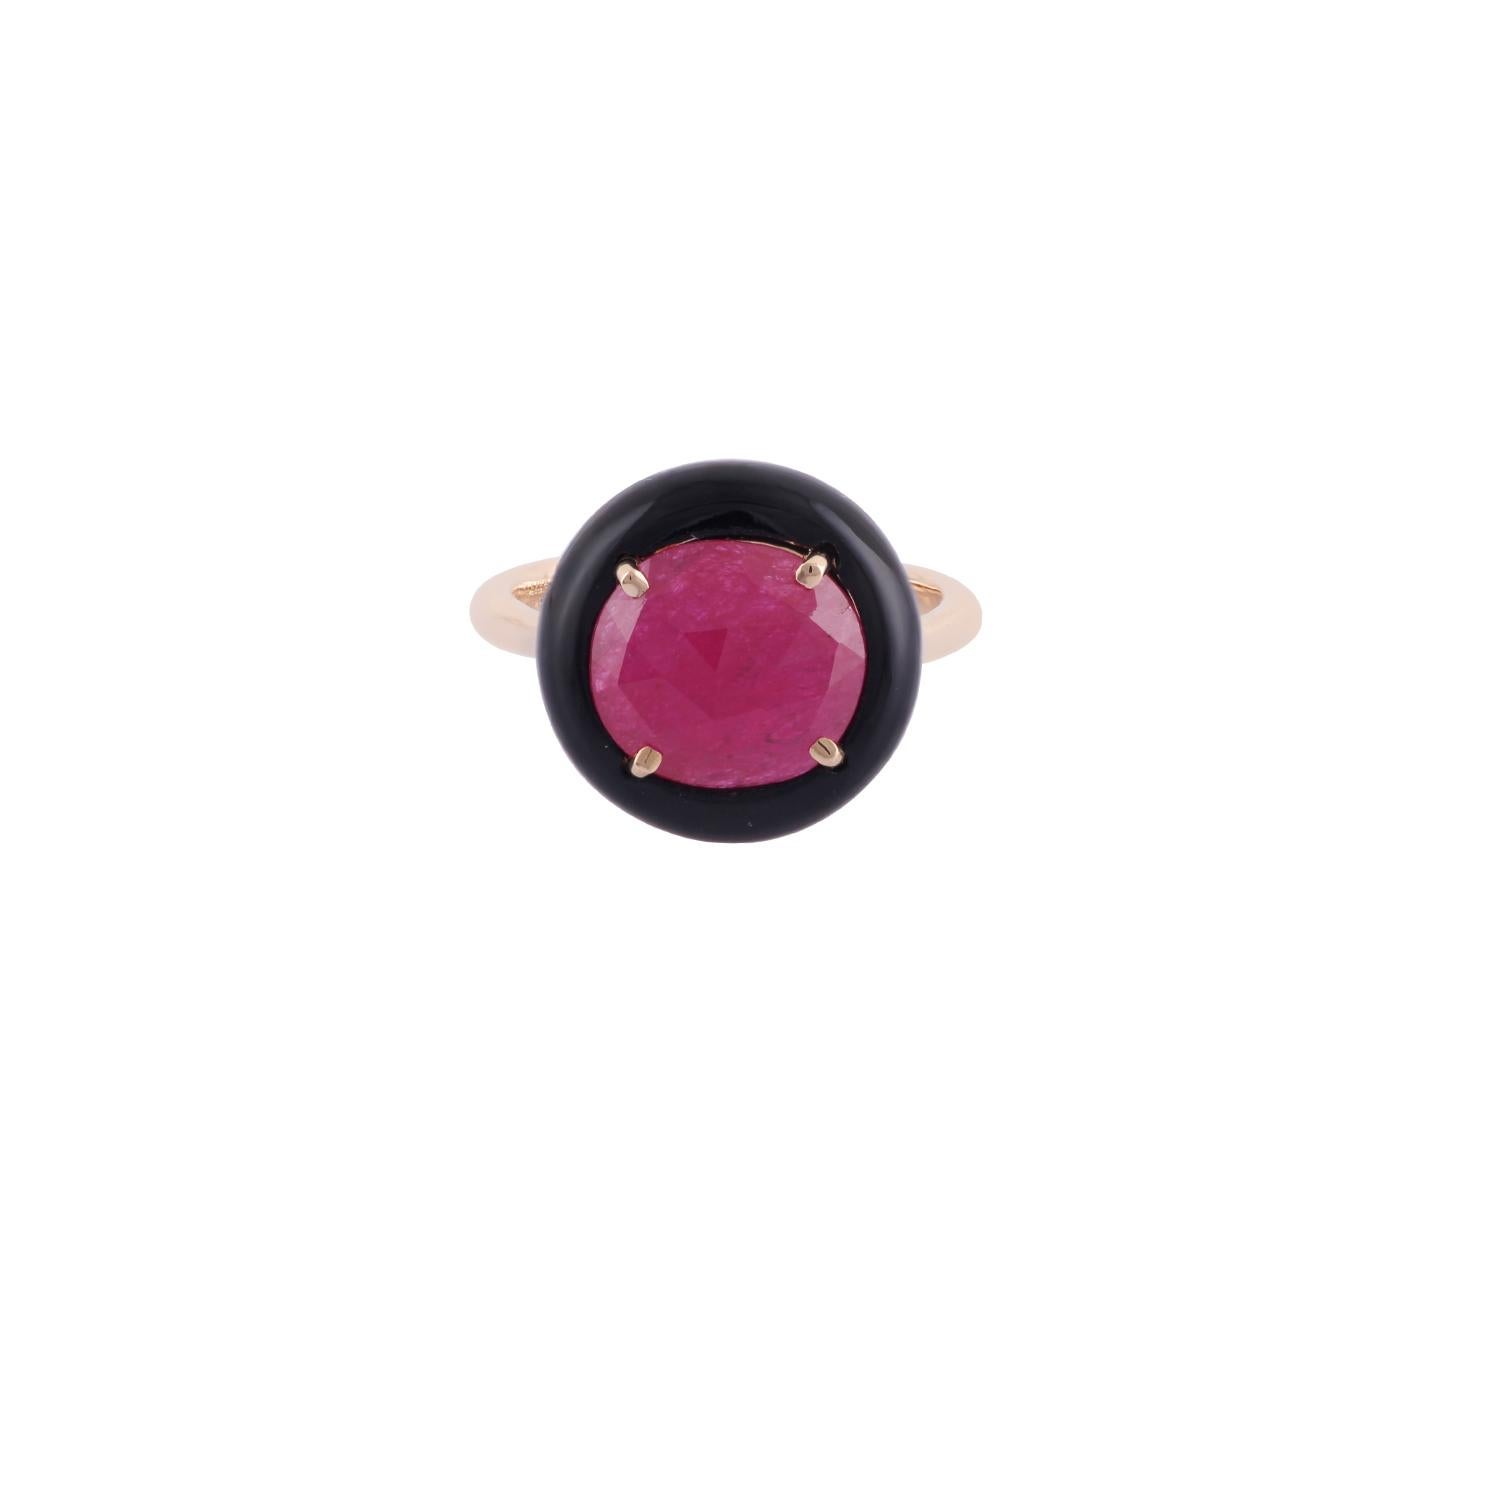 Magnificent ruby, Black onyx ring. High brilliance, Round faceted, natural 3.41 carats ruby mounted in high profile , accented with Black onyx. Handcrafted masterpiece design set in high polished 18 karats Yellow gold. 
Statement piece!

Ruby: 3.41